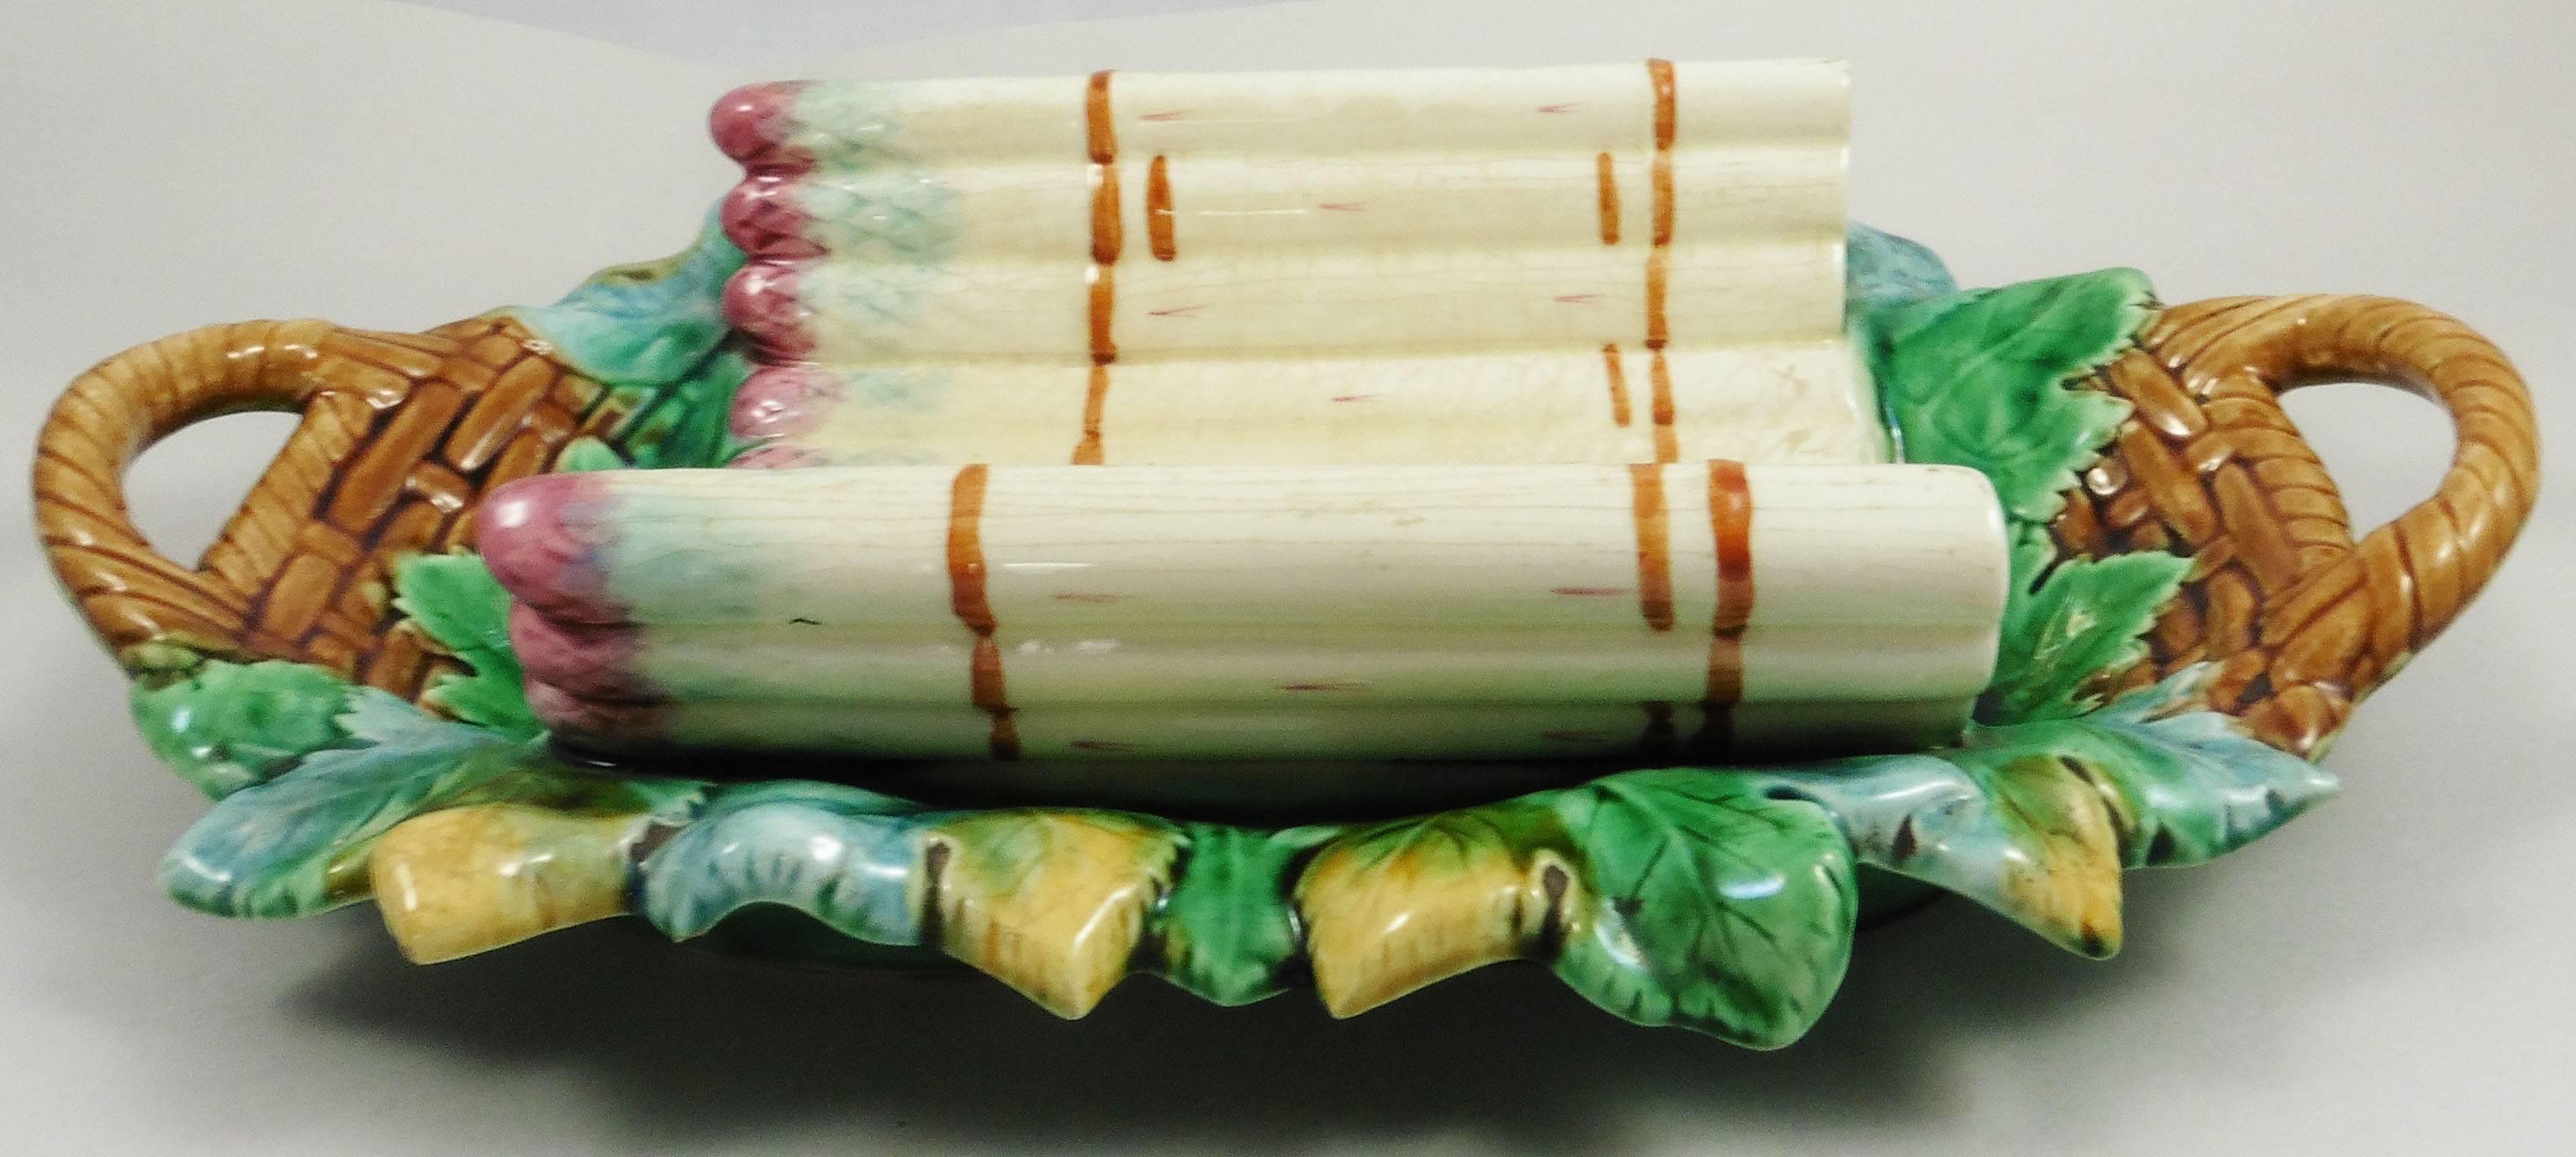 A very colorful 19th century Majolica handled asparagus platter realized by the Manufacture of Gien, A basket trompe l'oeil with green leaves.
Every important French manufactures produced at the end of the 19th century asparagus and artichoke sets.